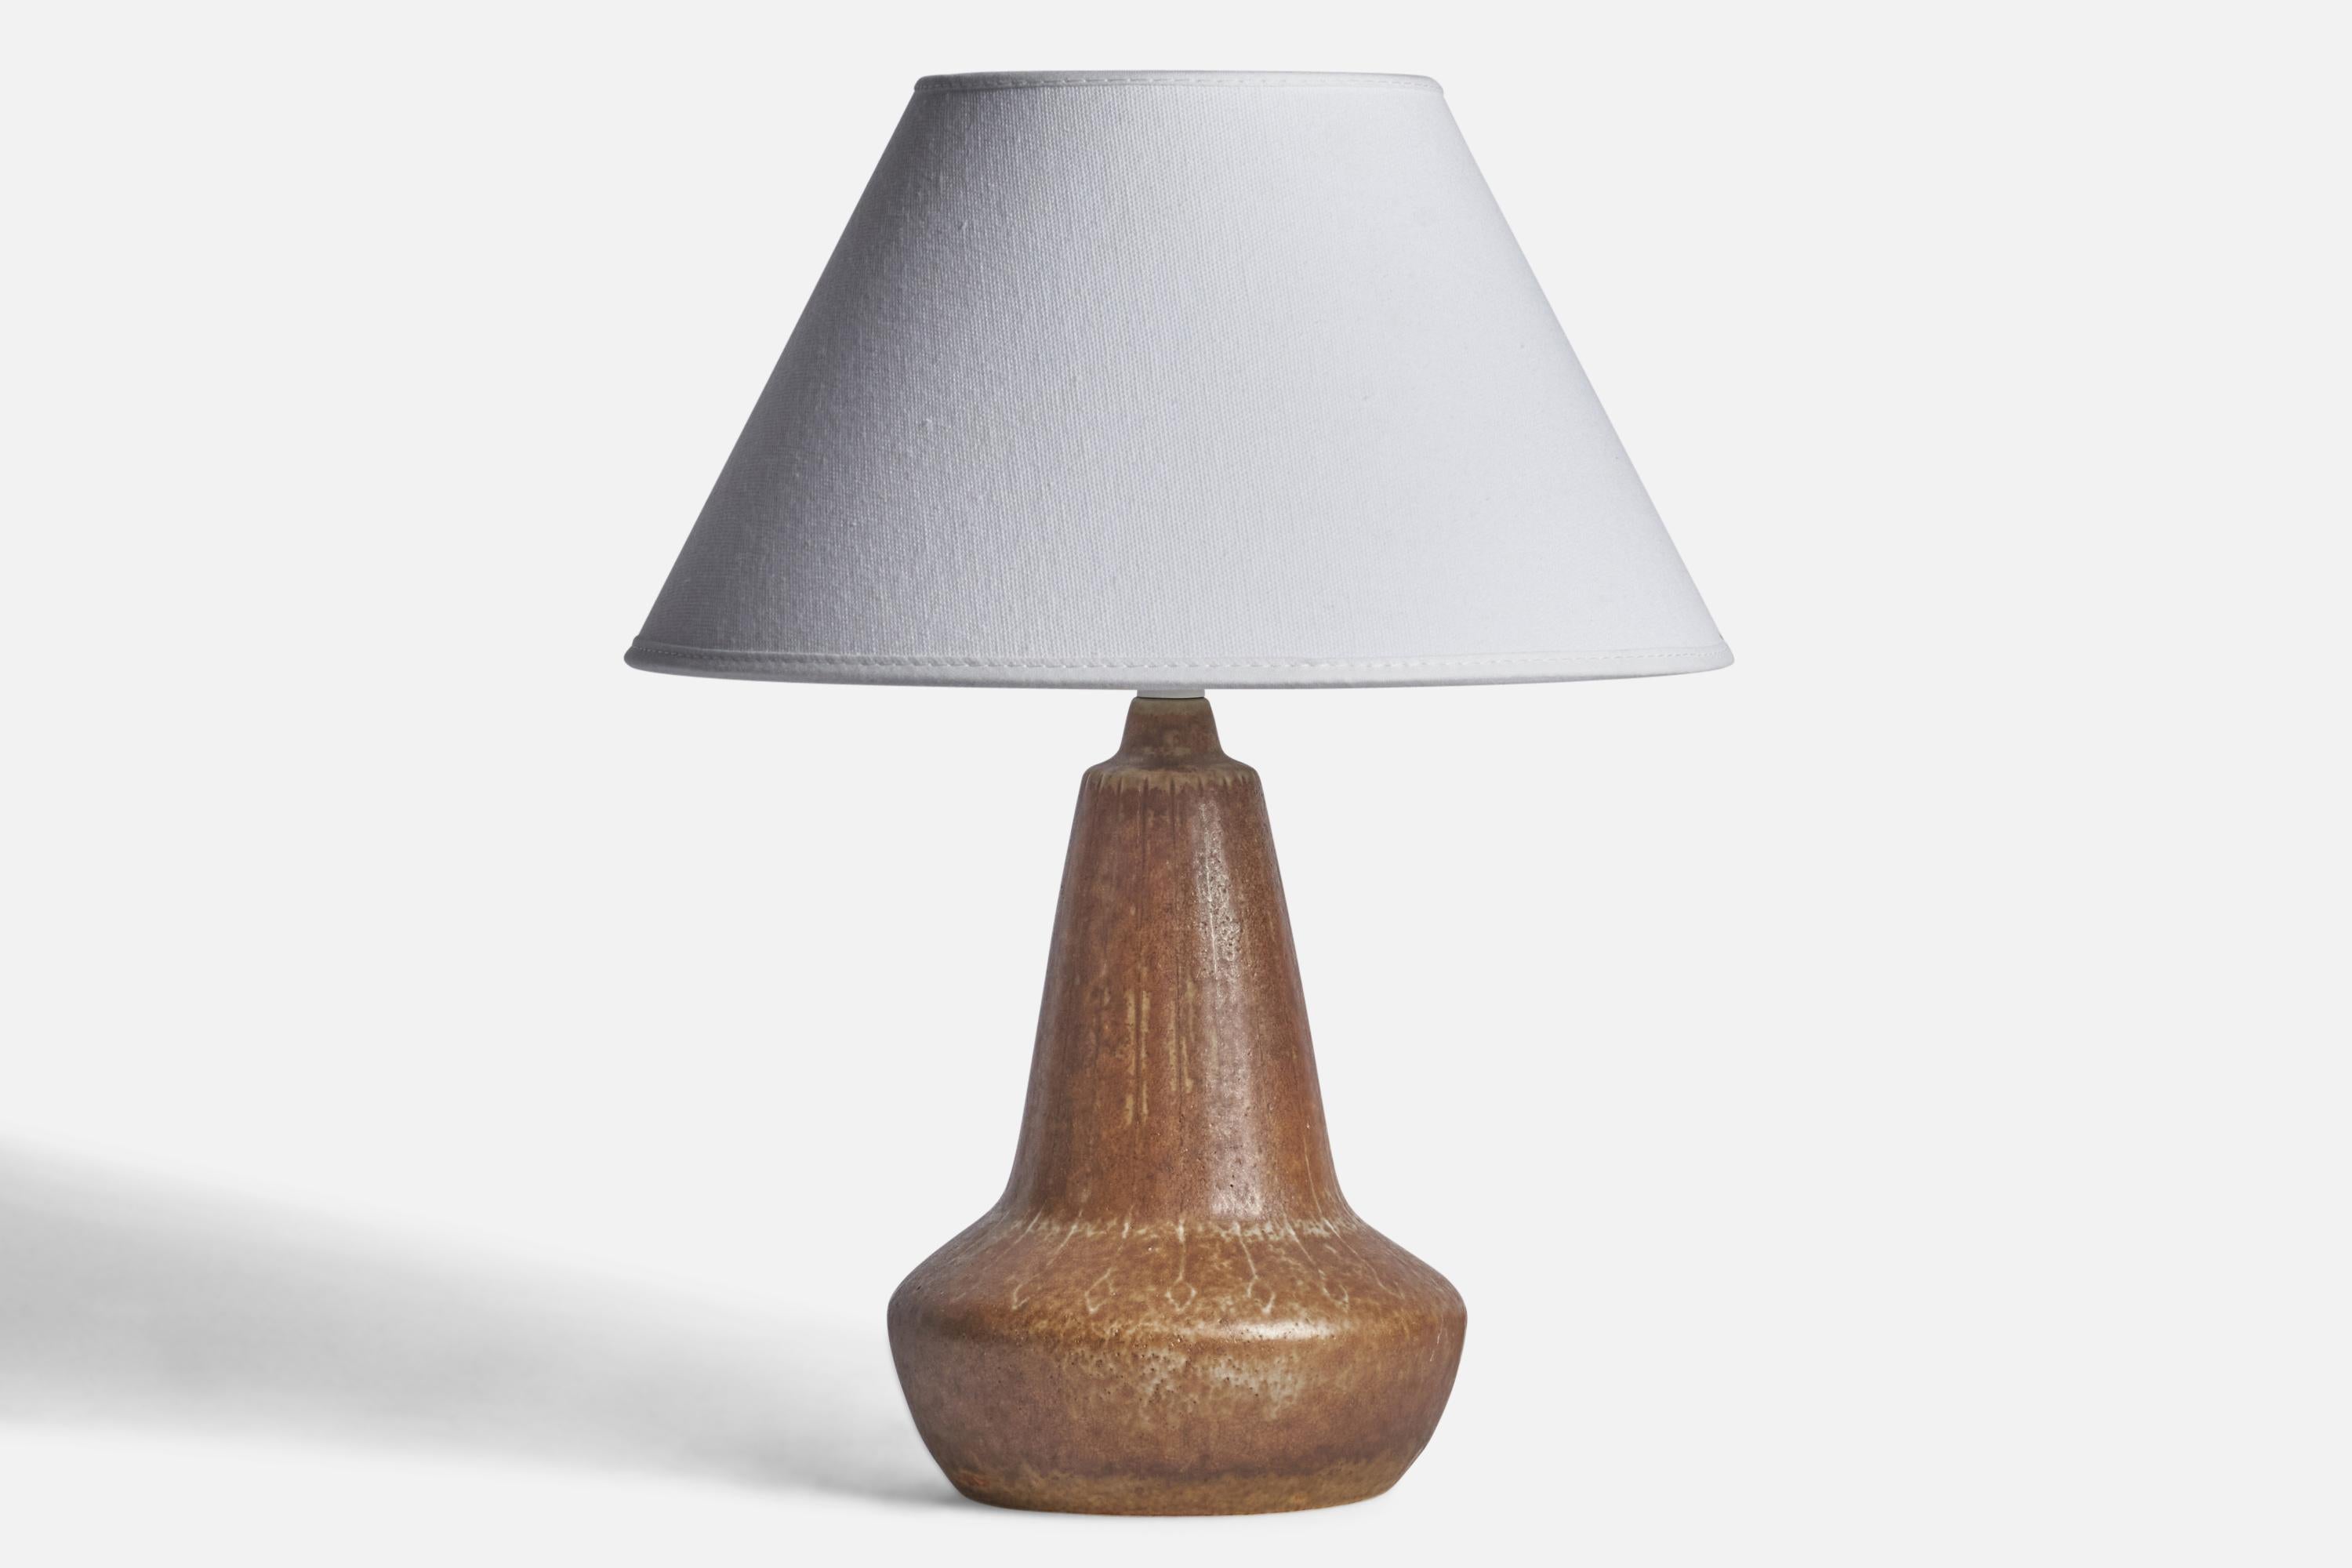 A small brown-glazed stoneware table lamp designed by Gunnar Nylund and produced by Rörstrand, Sweden, 1940s.

Dimensions of Lamp (inches): 9.5” H x 5” Diameter
Dimensions of Shade (inches): 4.25” Top Diameter x 9.75” Bottom Diameter x 5.75”